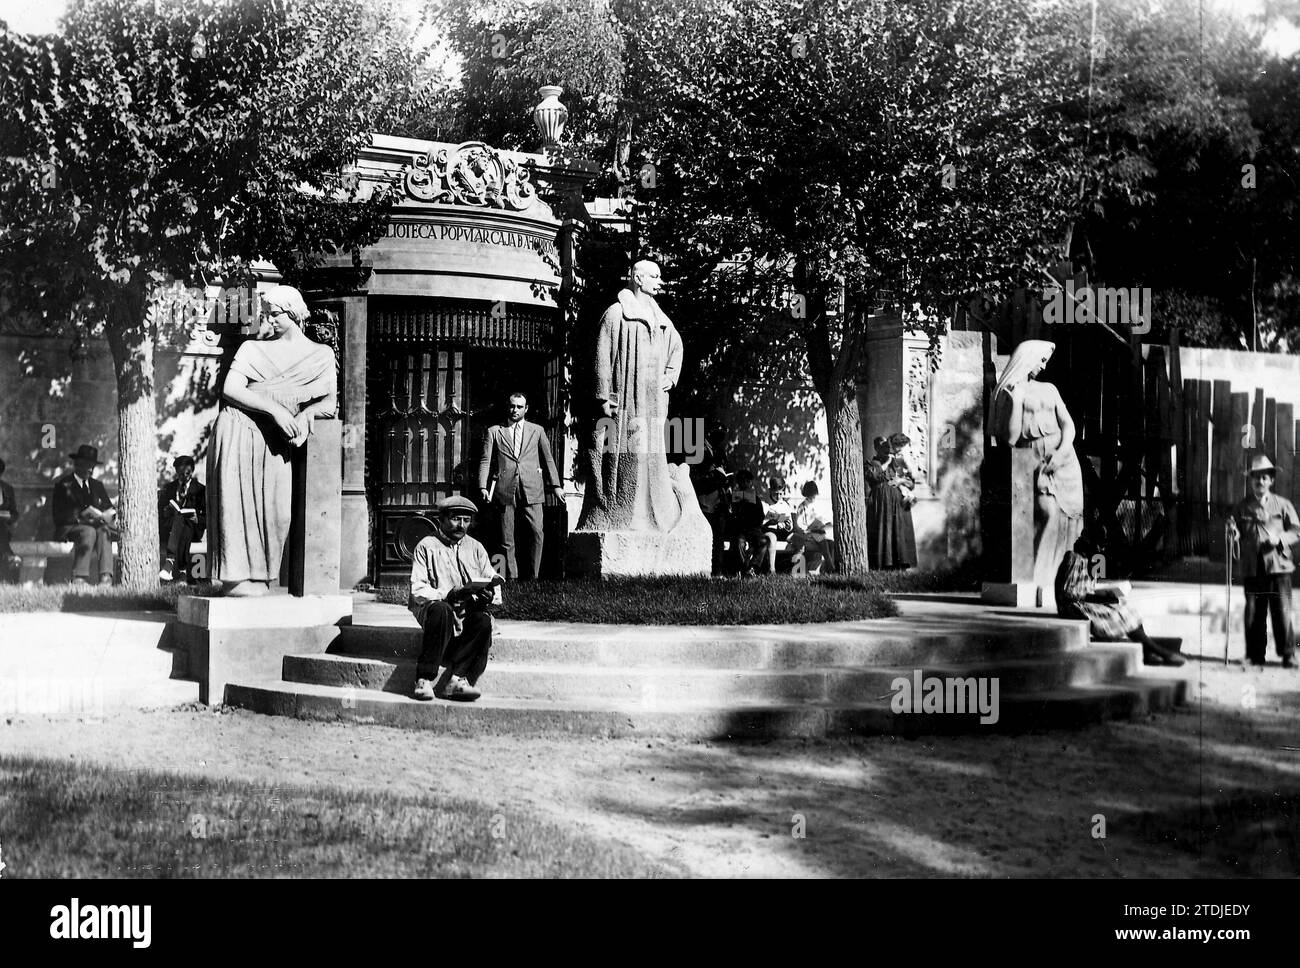 09/01/1926. Salamanca. Work of Culture. Popular open-air library, Built, in the Campo de San Francisco, by the Savings Bank and Monte de Piedad of Salamanca, the work of the architect D. Joaquín Secall and the sculptor Juan Cristóbal. (photo A. Gombau) -. Credit: Album / Archivo ABC / Amalio Gombau Stock Photo